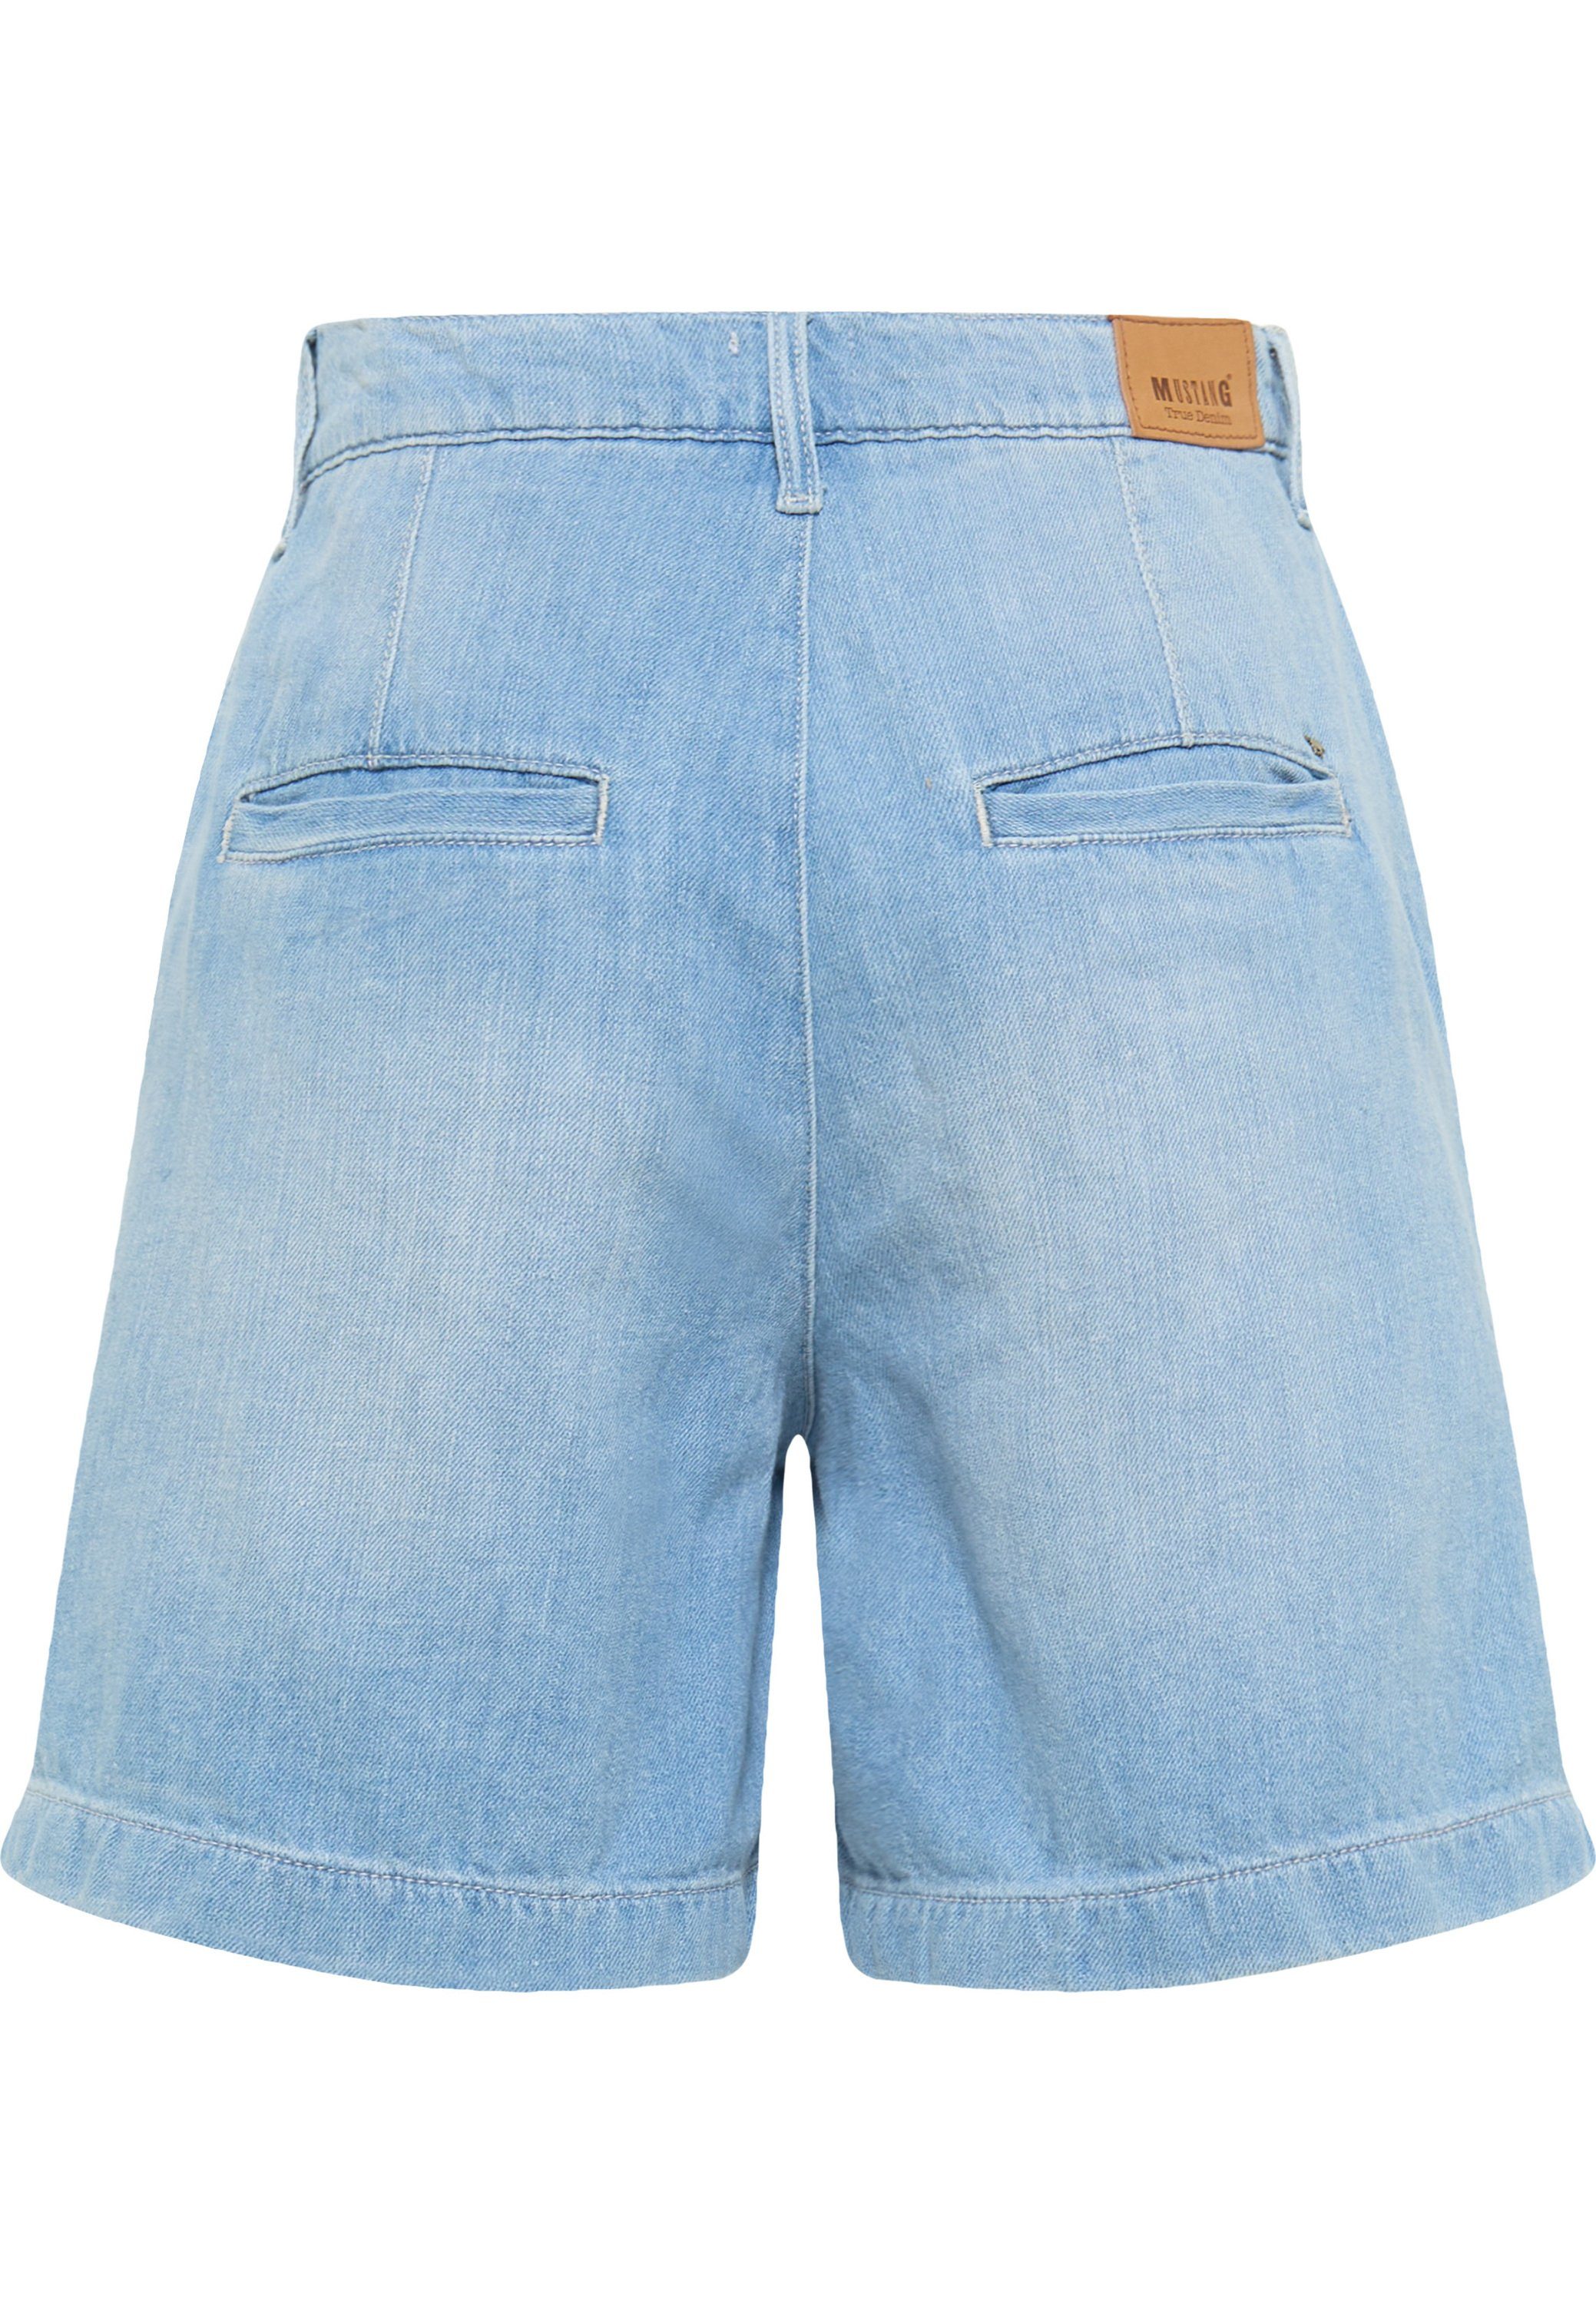 MUSTANG Shorts Style Pleated Jeansshorts Mustang